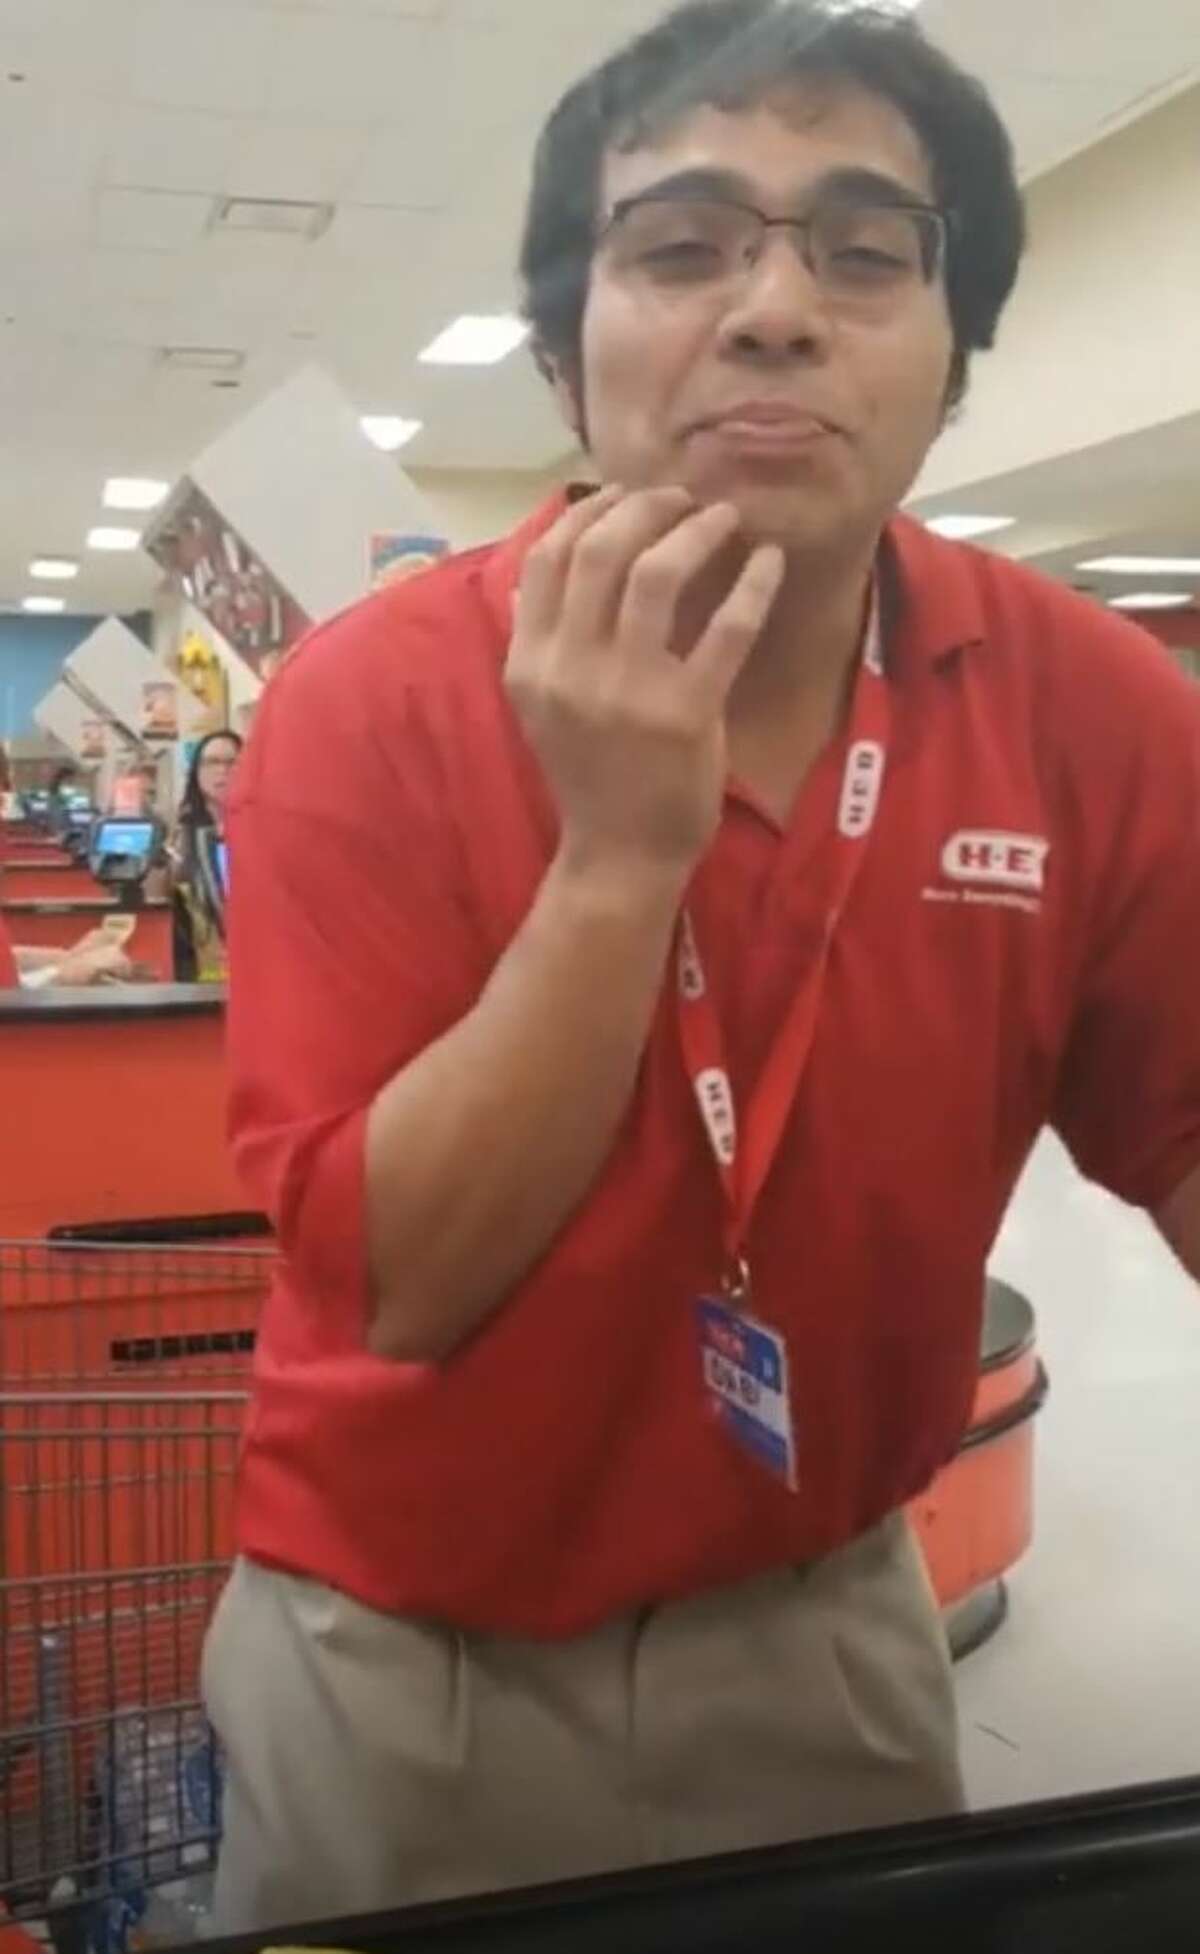 A San Antonio H-E-B cashier has garnered internet fame after a customer posted a video of his sales pitch, which included an original rap.